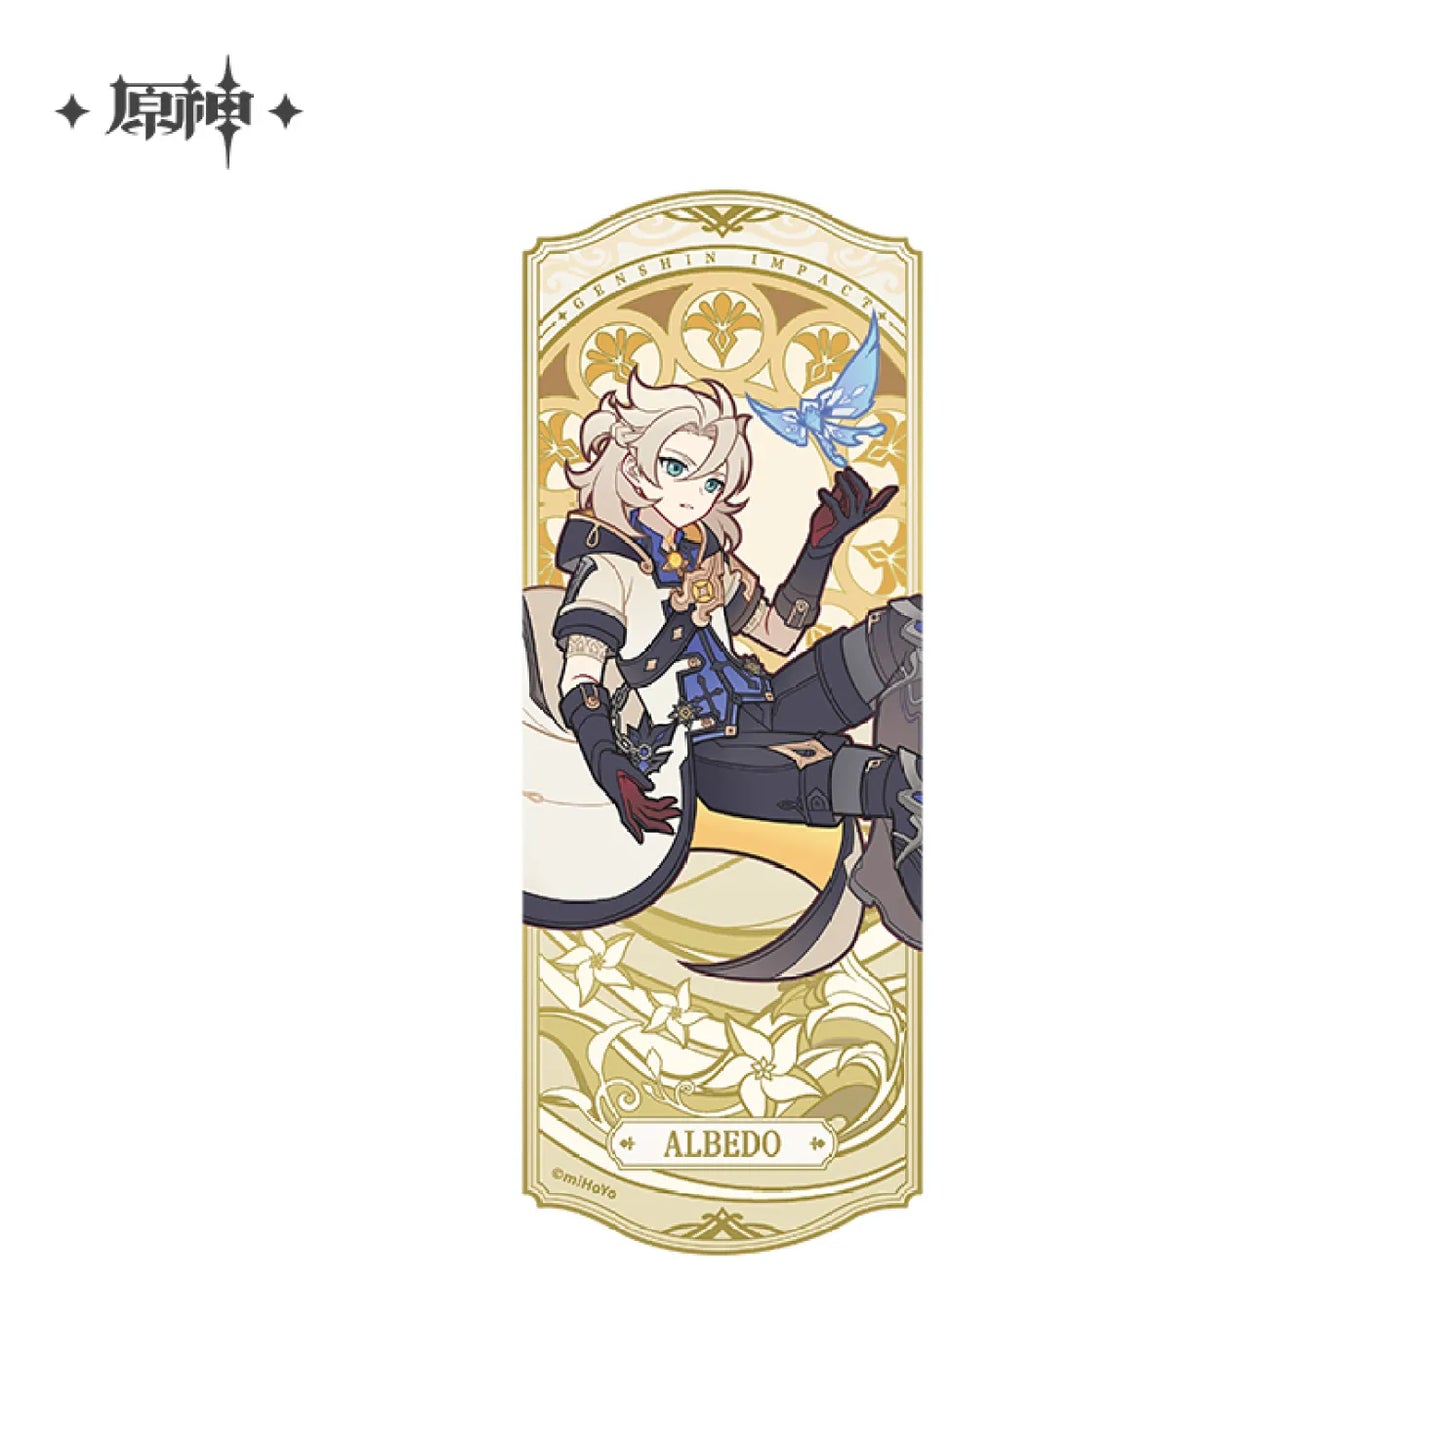 [OFFICIAL MERCHANDISE] Genshin Impact Windblume’s Breath Series Collectible Card